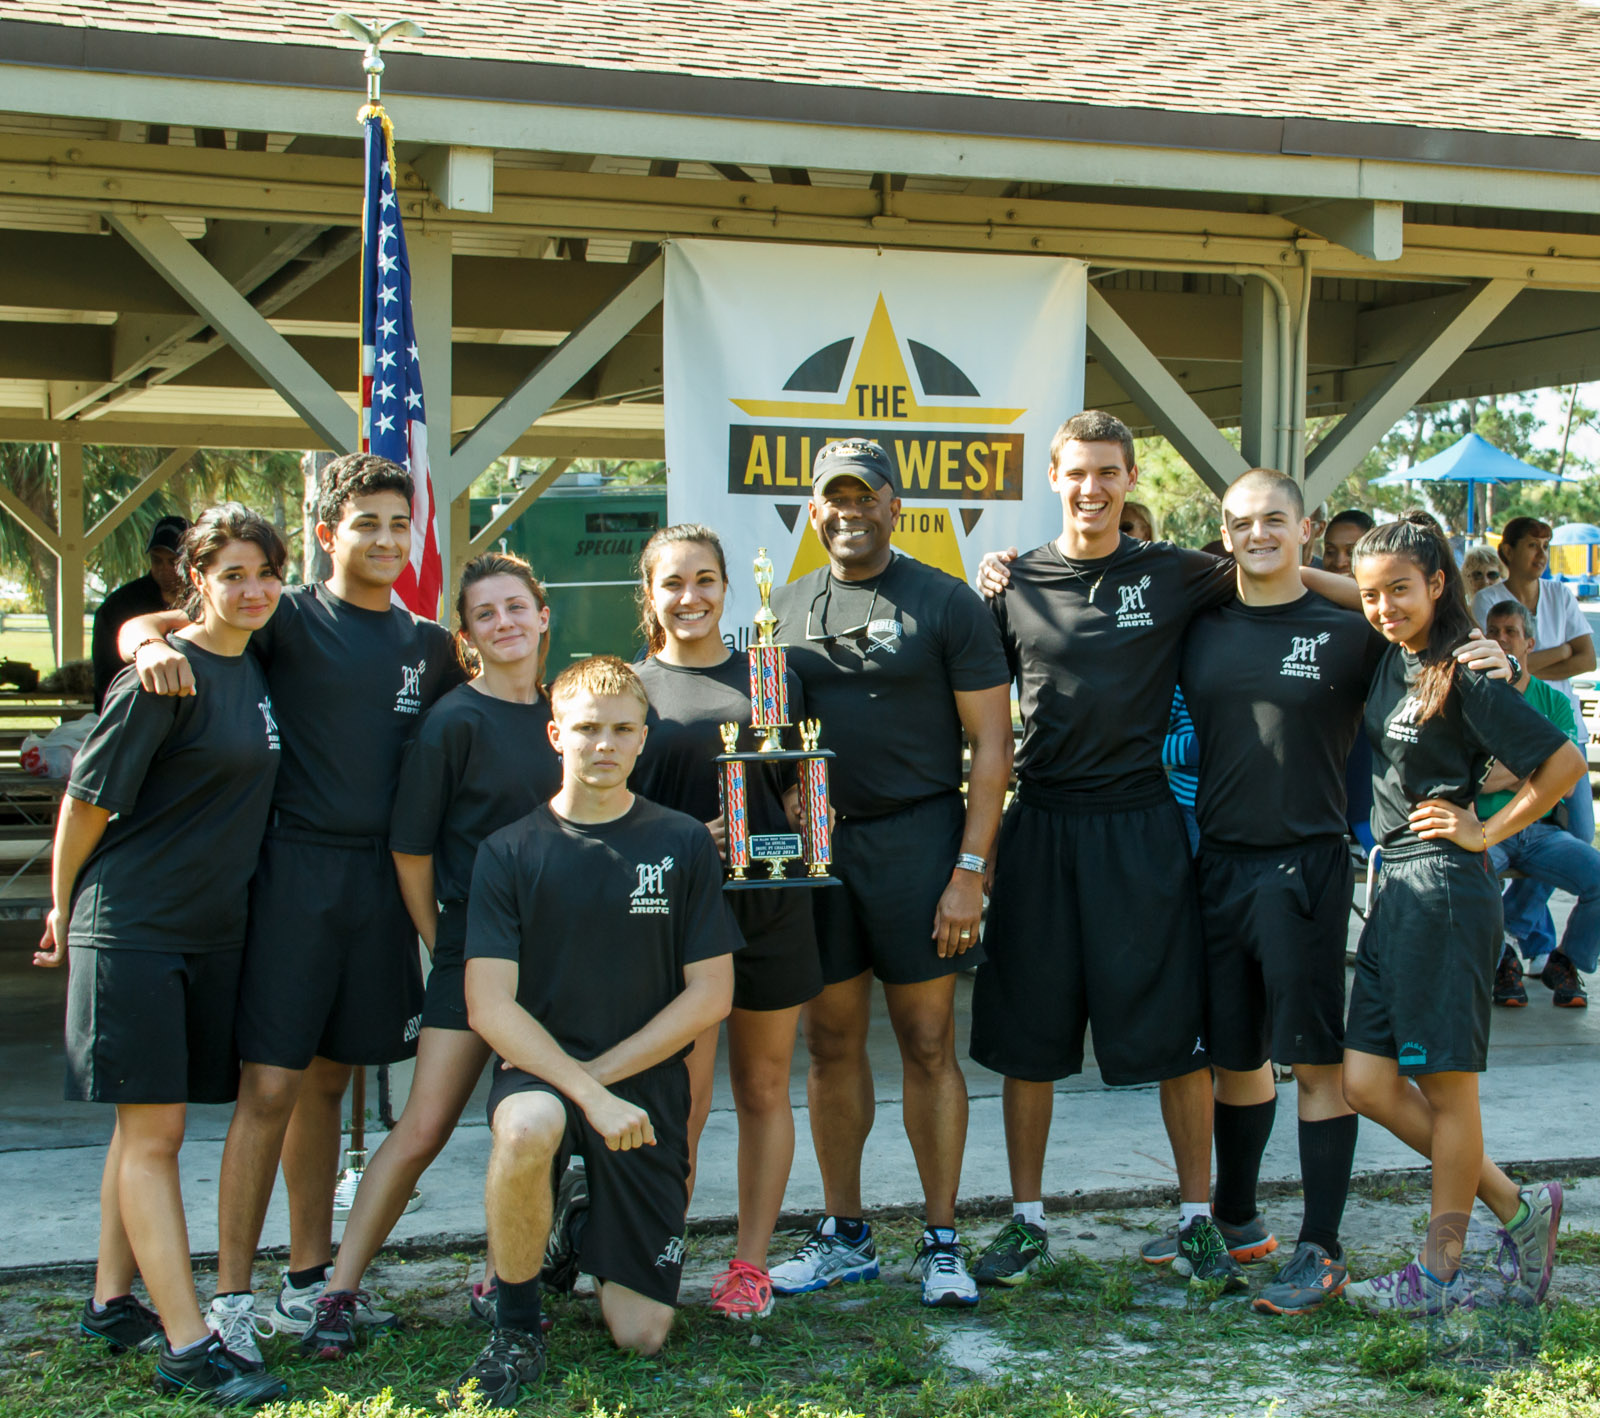 First Place Winning Team with Lt. Col Allen West